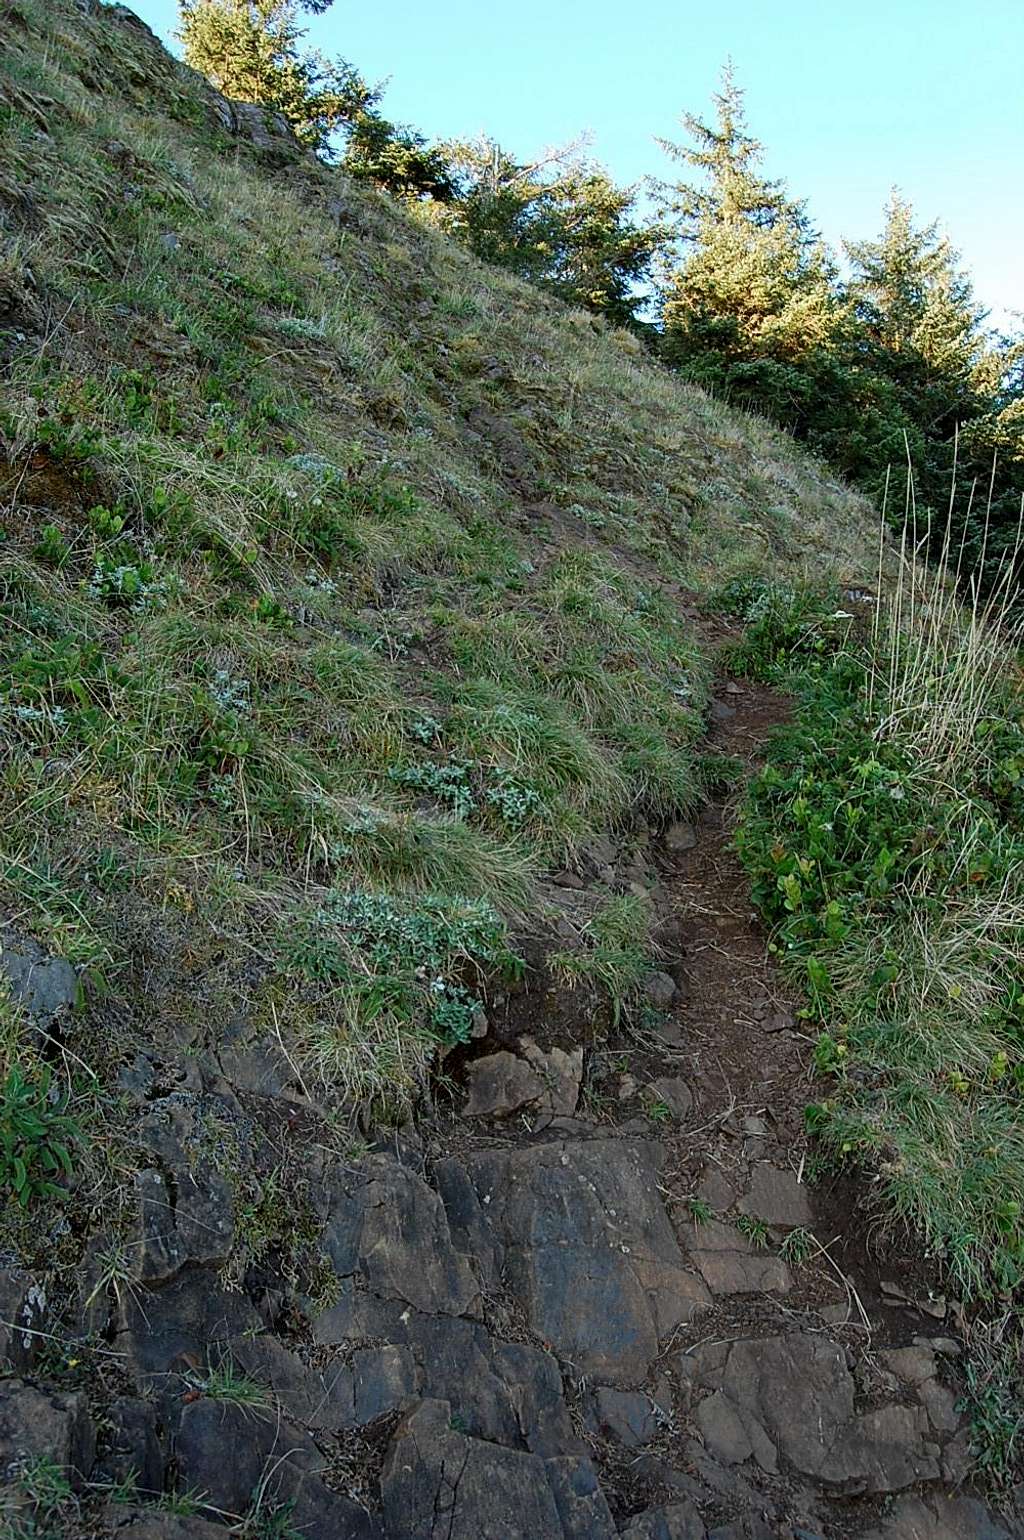 Here is the 2nd use trail that scrambles up the south side to the summit